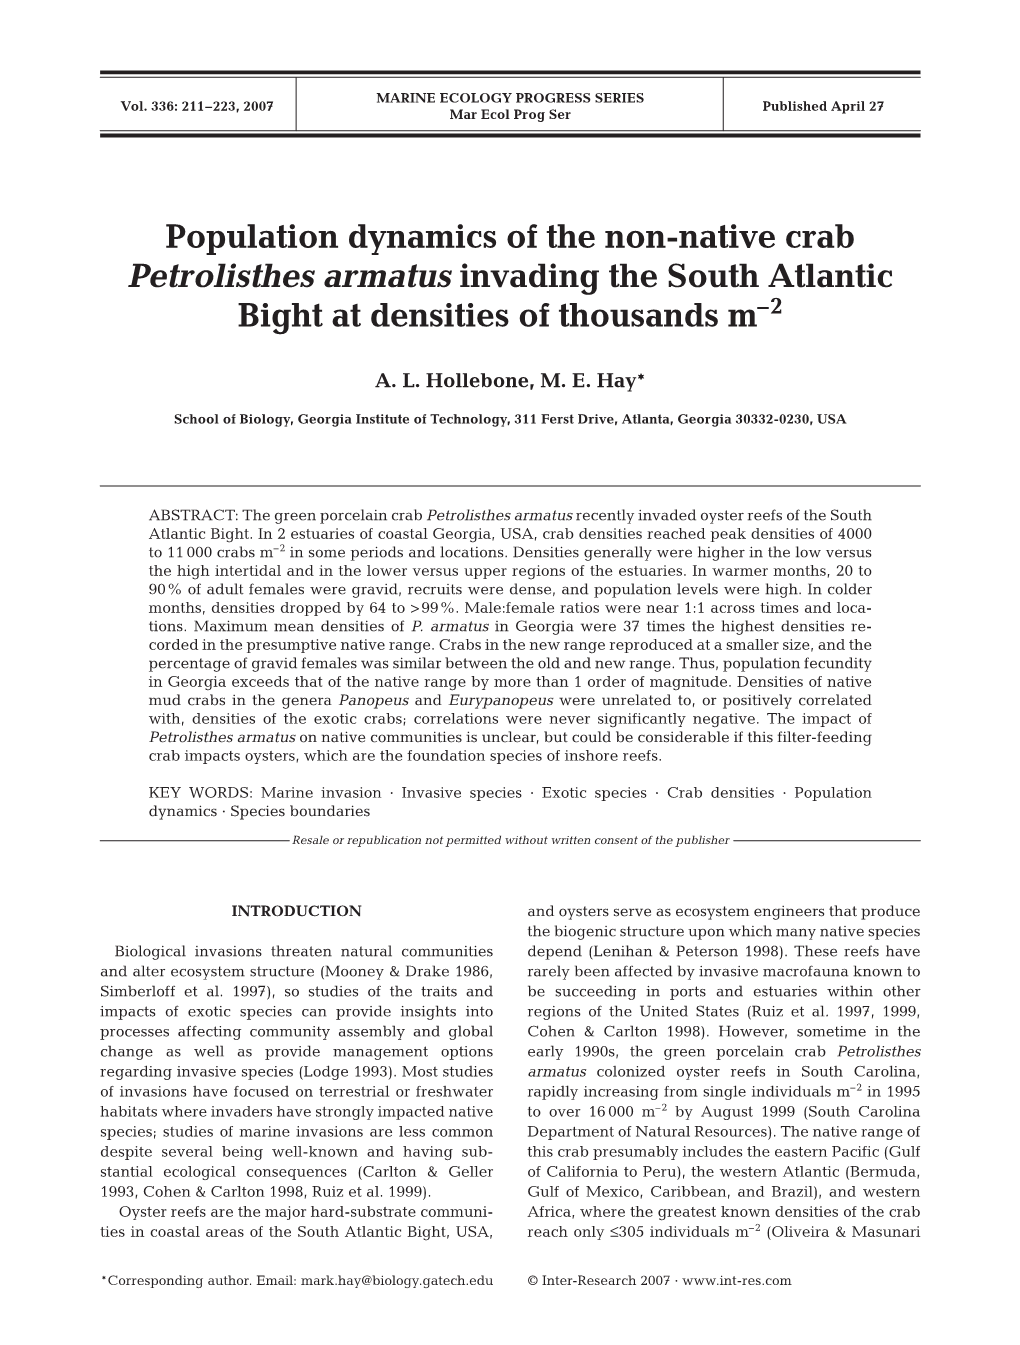 Population Dynamics of the Non-Native Crab Petrolisthes Armatus Invading the South Atlantic Bight at Densities of Thousands M–2